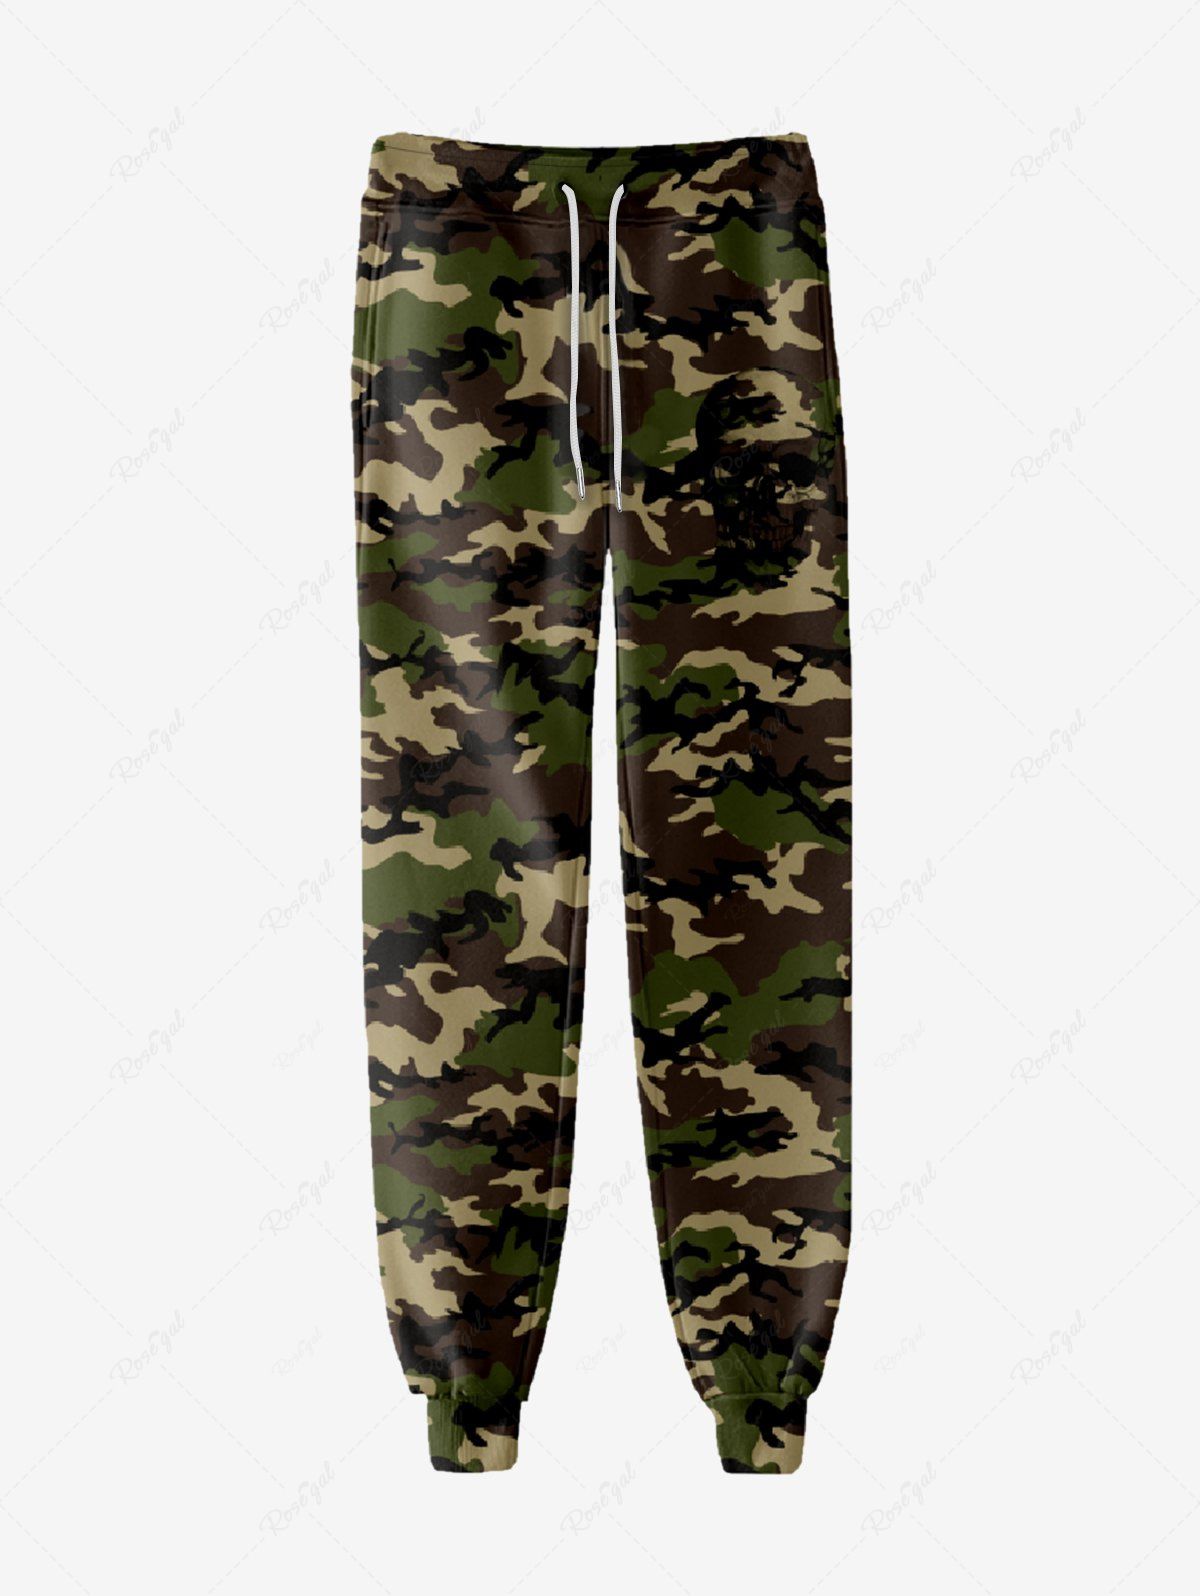 Affordable Gothic Camouflage Drawstring Pockets Sweatpants For Men  